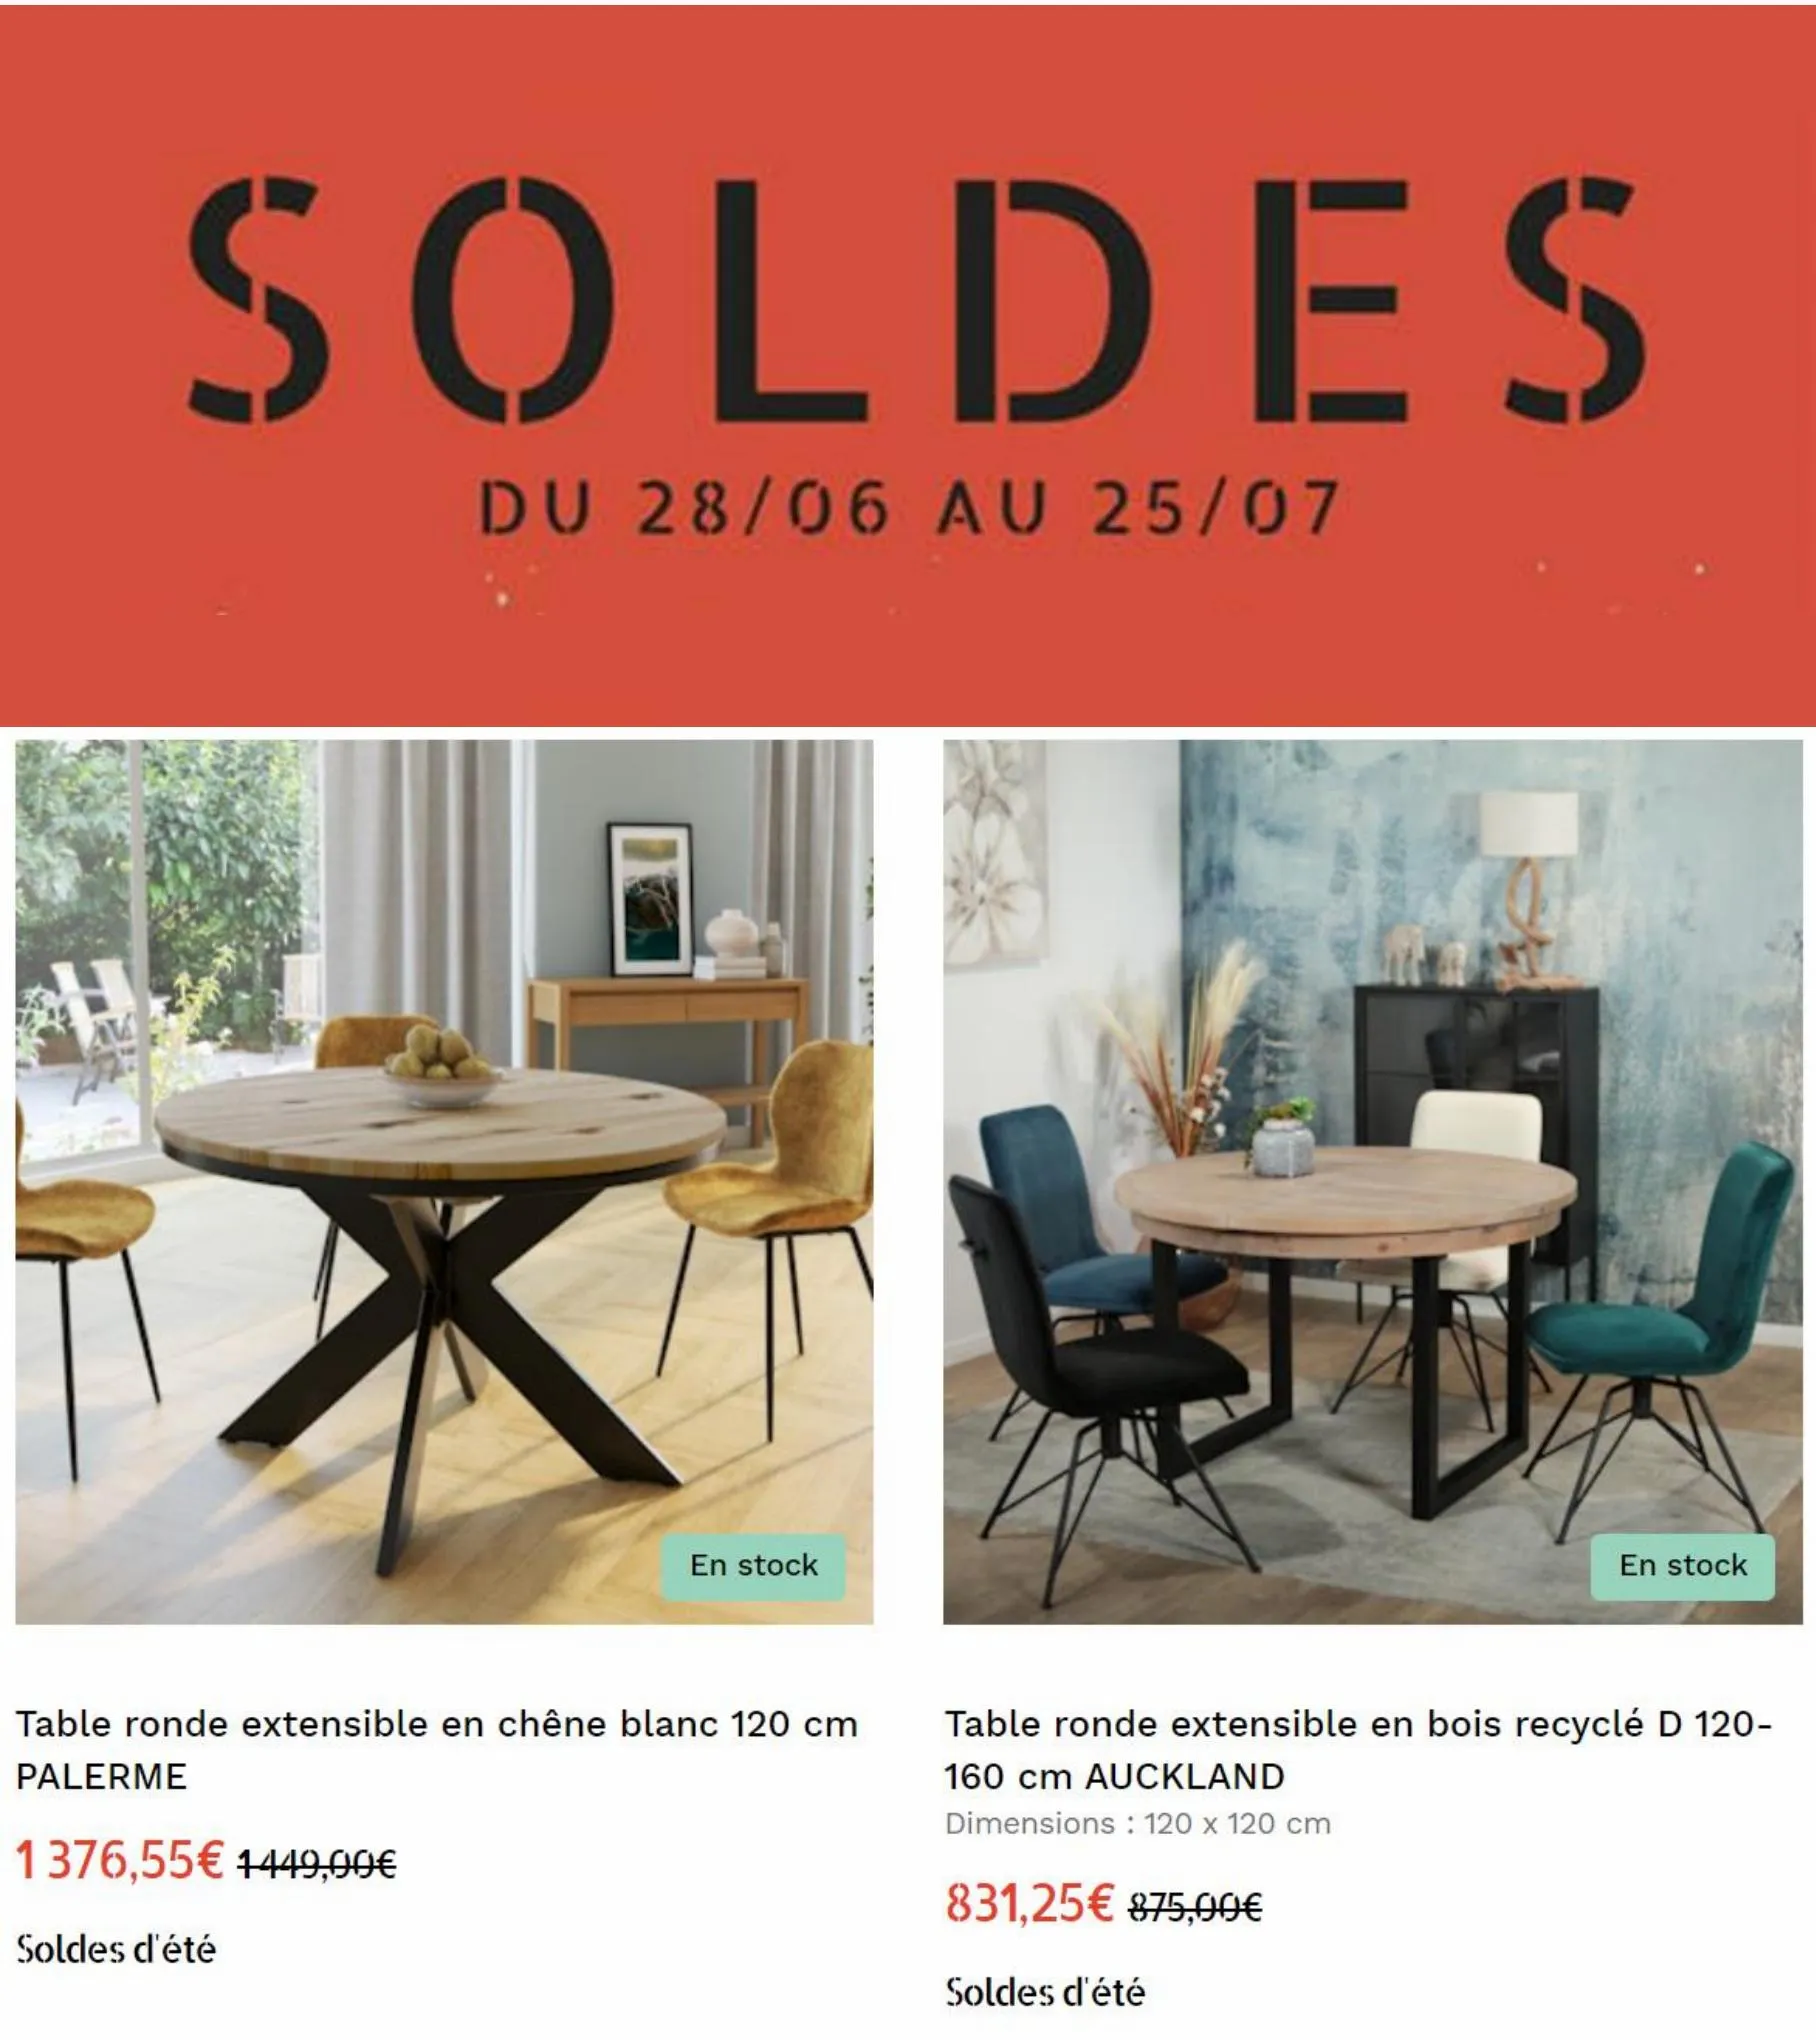 Catalogue Soldes, page 00007